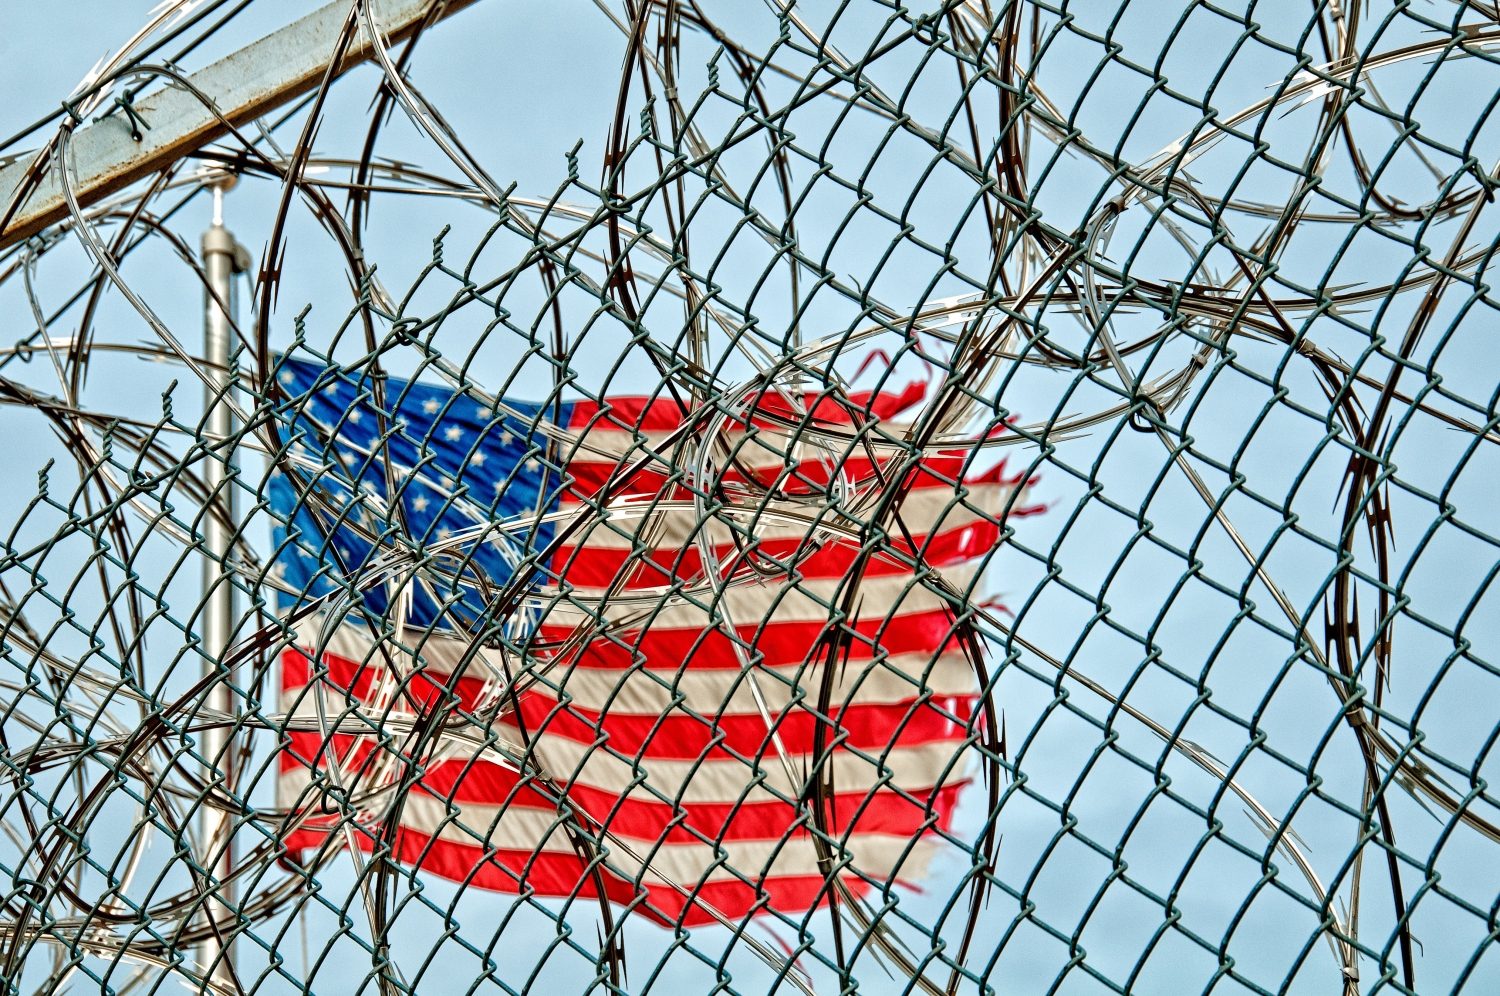 american-flag-barbed-wire-fence-54456